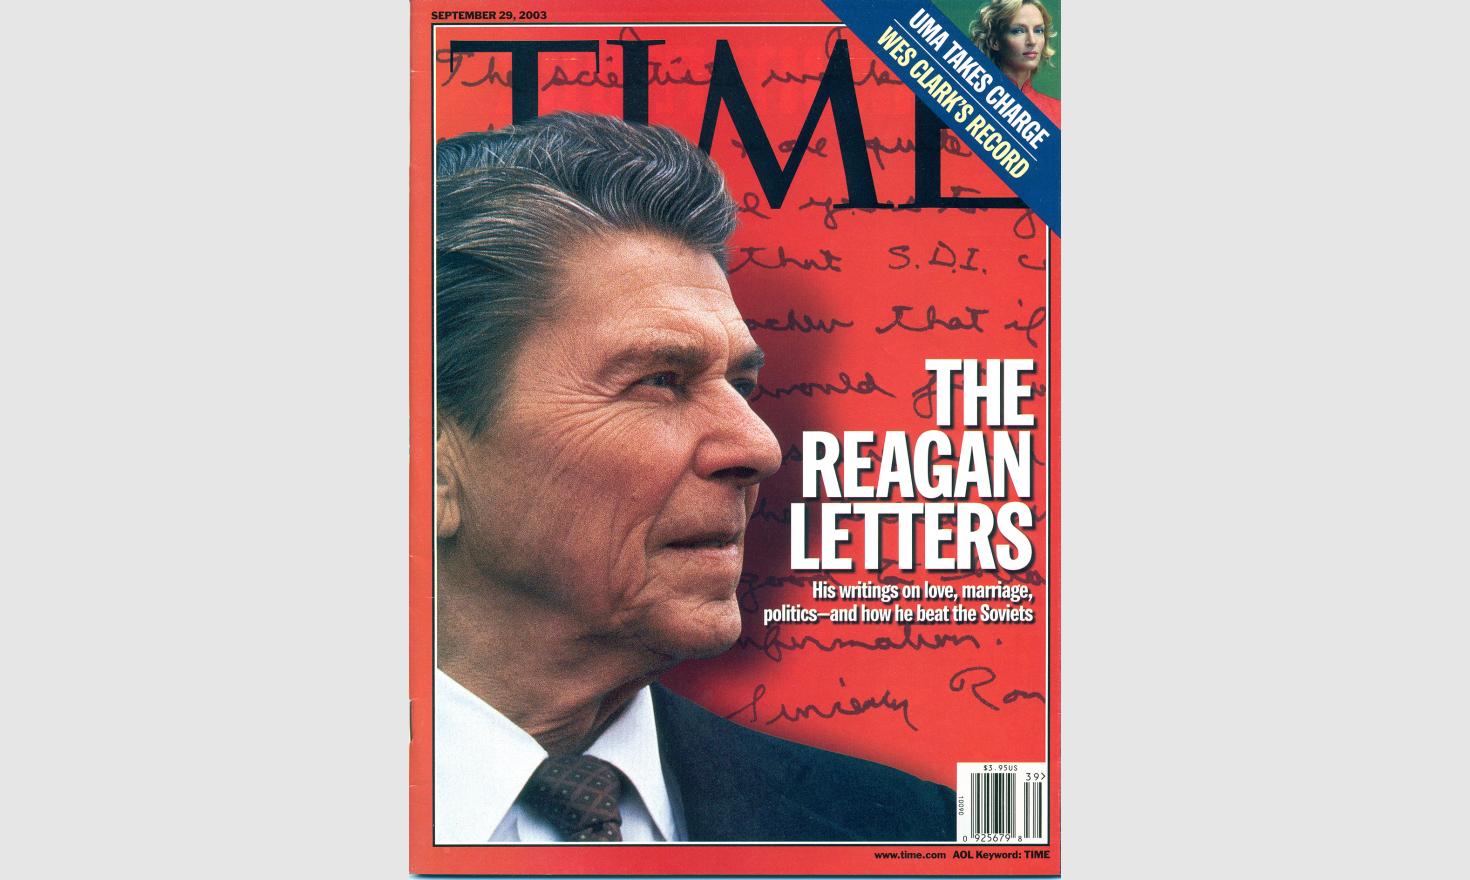 Time magazine september 29, 2003. Picture taken during the 1980 presidential campaign